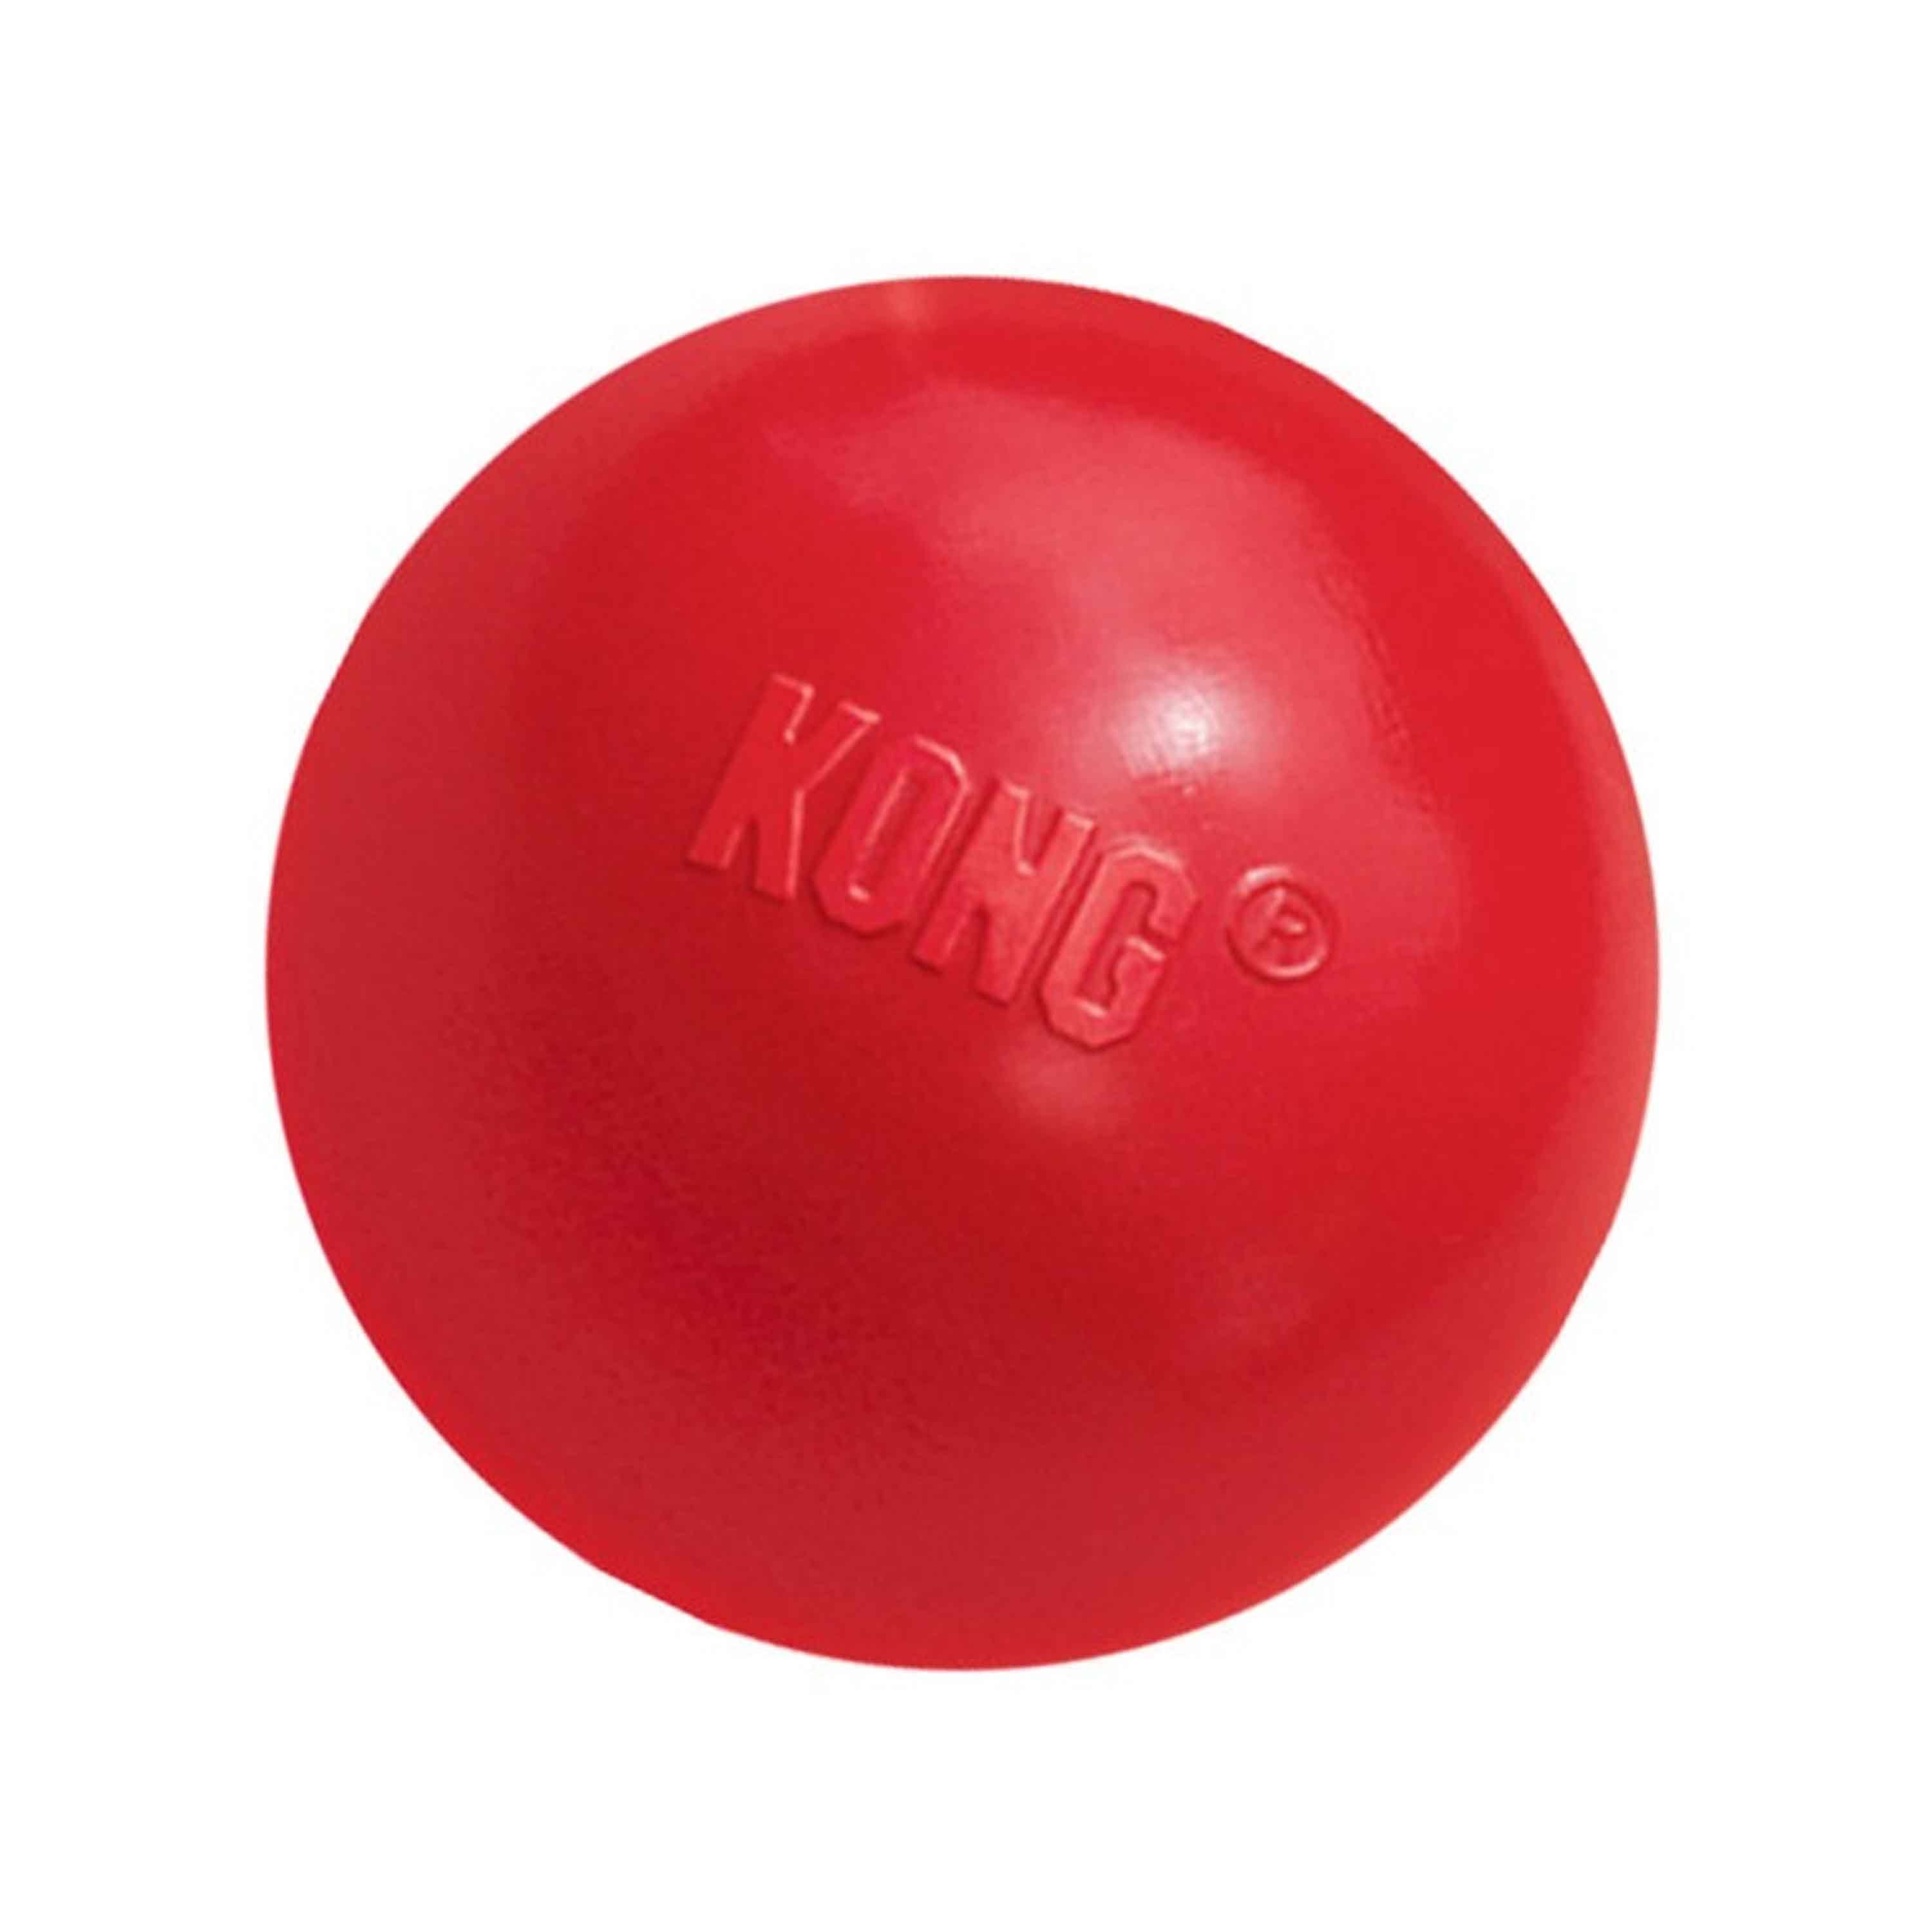 KONG Ball Dog Toy - Small, Red